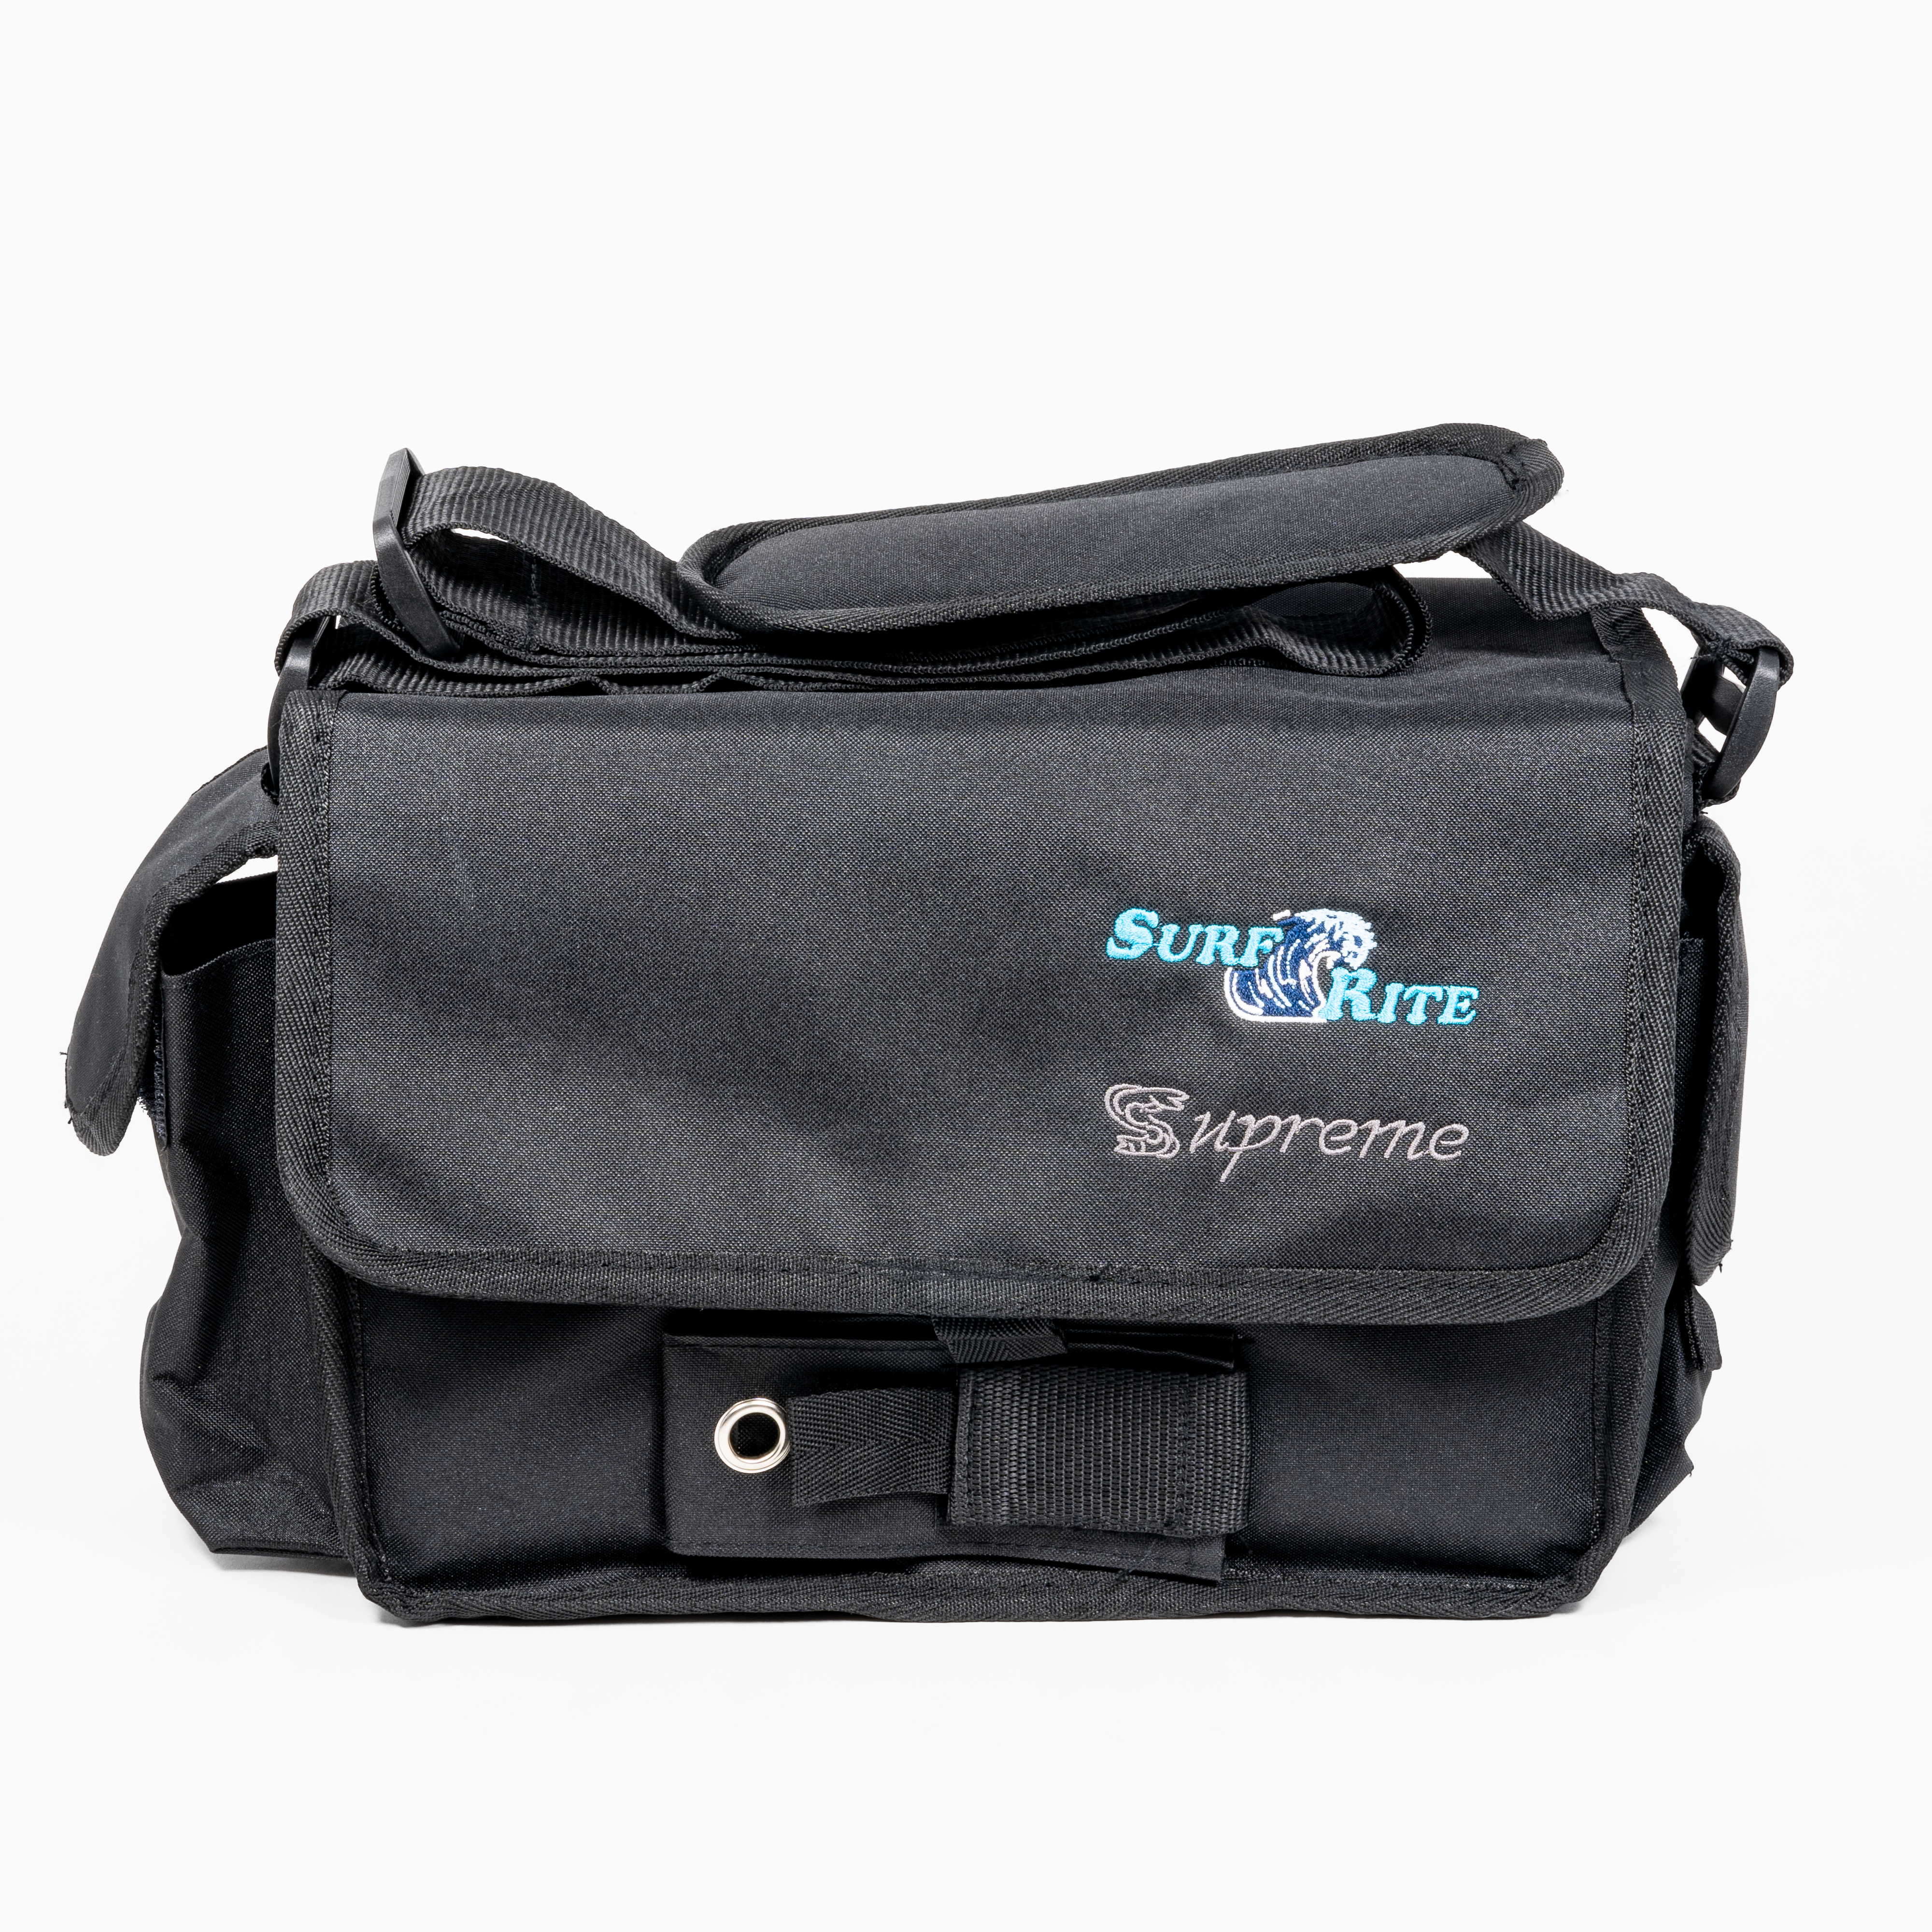 surfboard coffin bag, surfboard coffins, double surfboard bag, triple surfboard  bag, multi surfboard bag | Curve Surfboard Accessories - United States